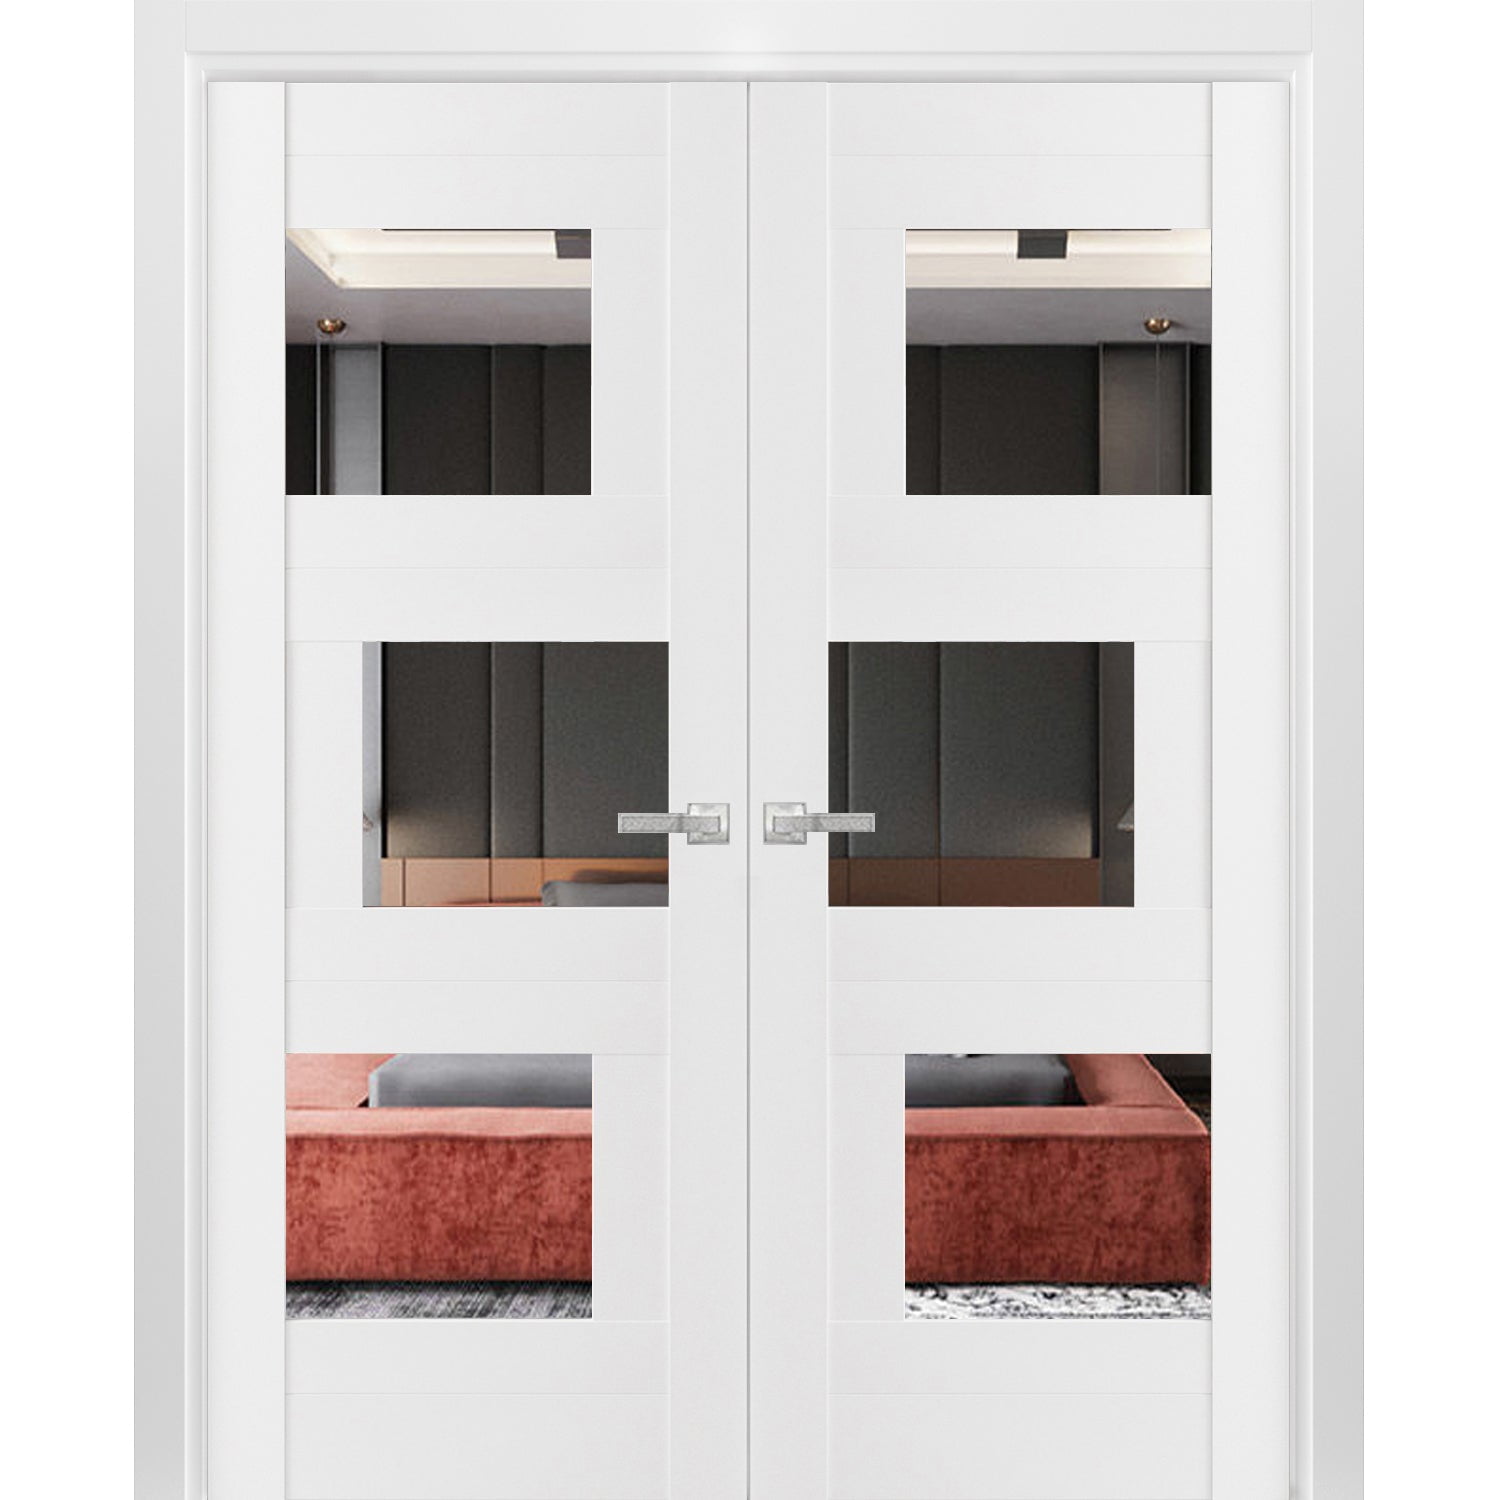 Solid Interior French Doors 64 x 84 inches | Sete 6999 White Silk with Mirror | Wood Solid Panel Frame Trims | Closet Bedroom Sturdy Doors - Walmart.com